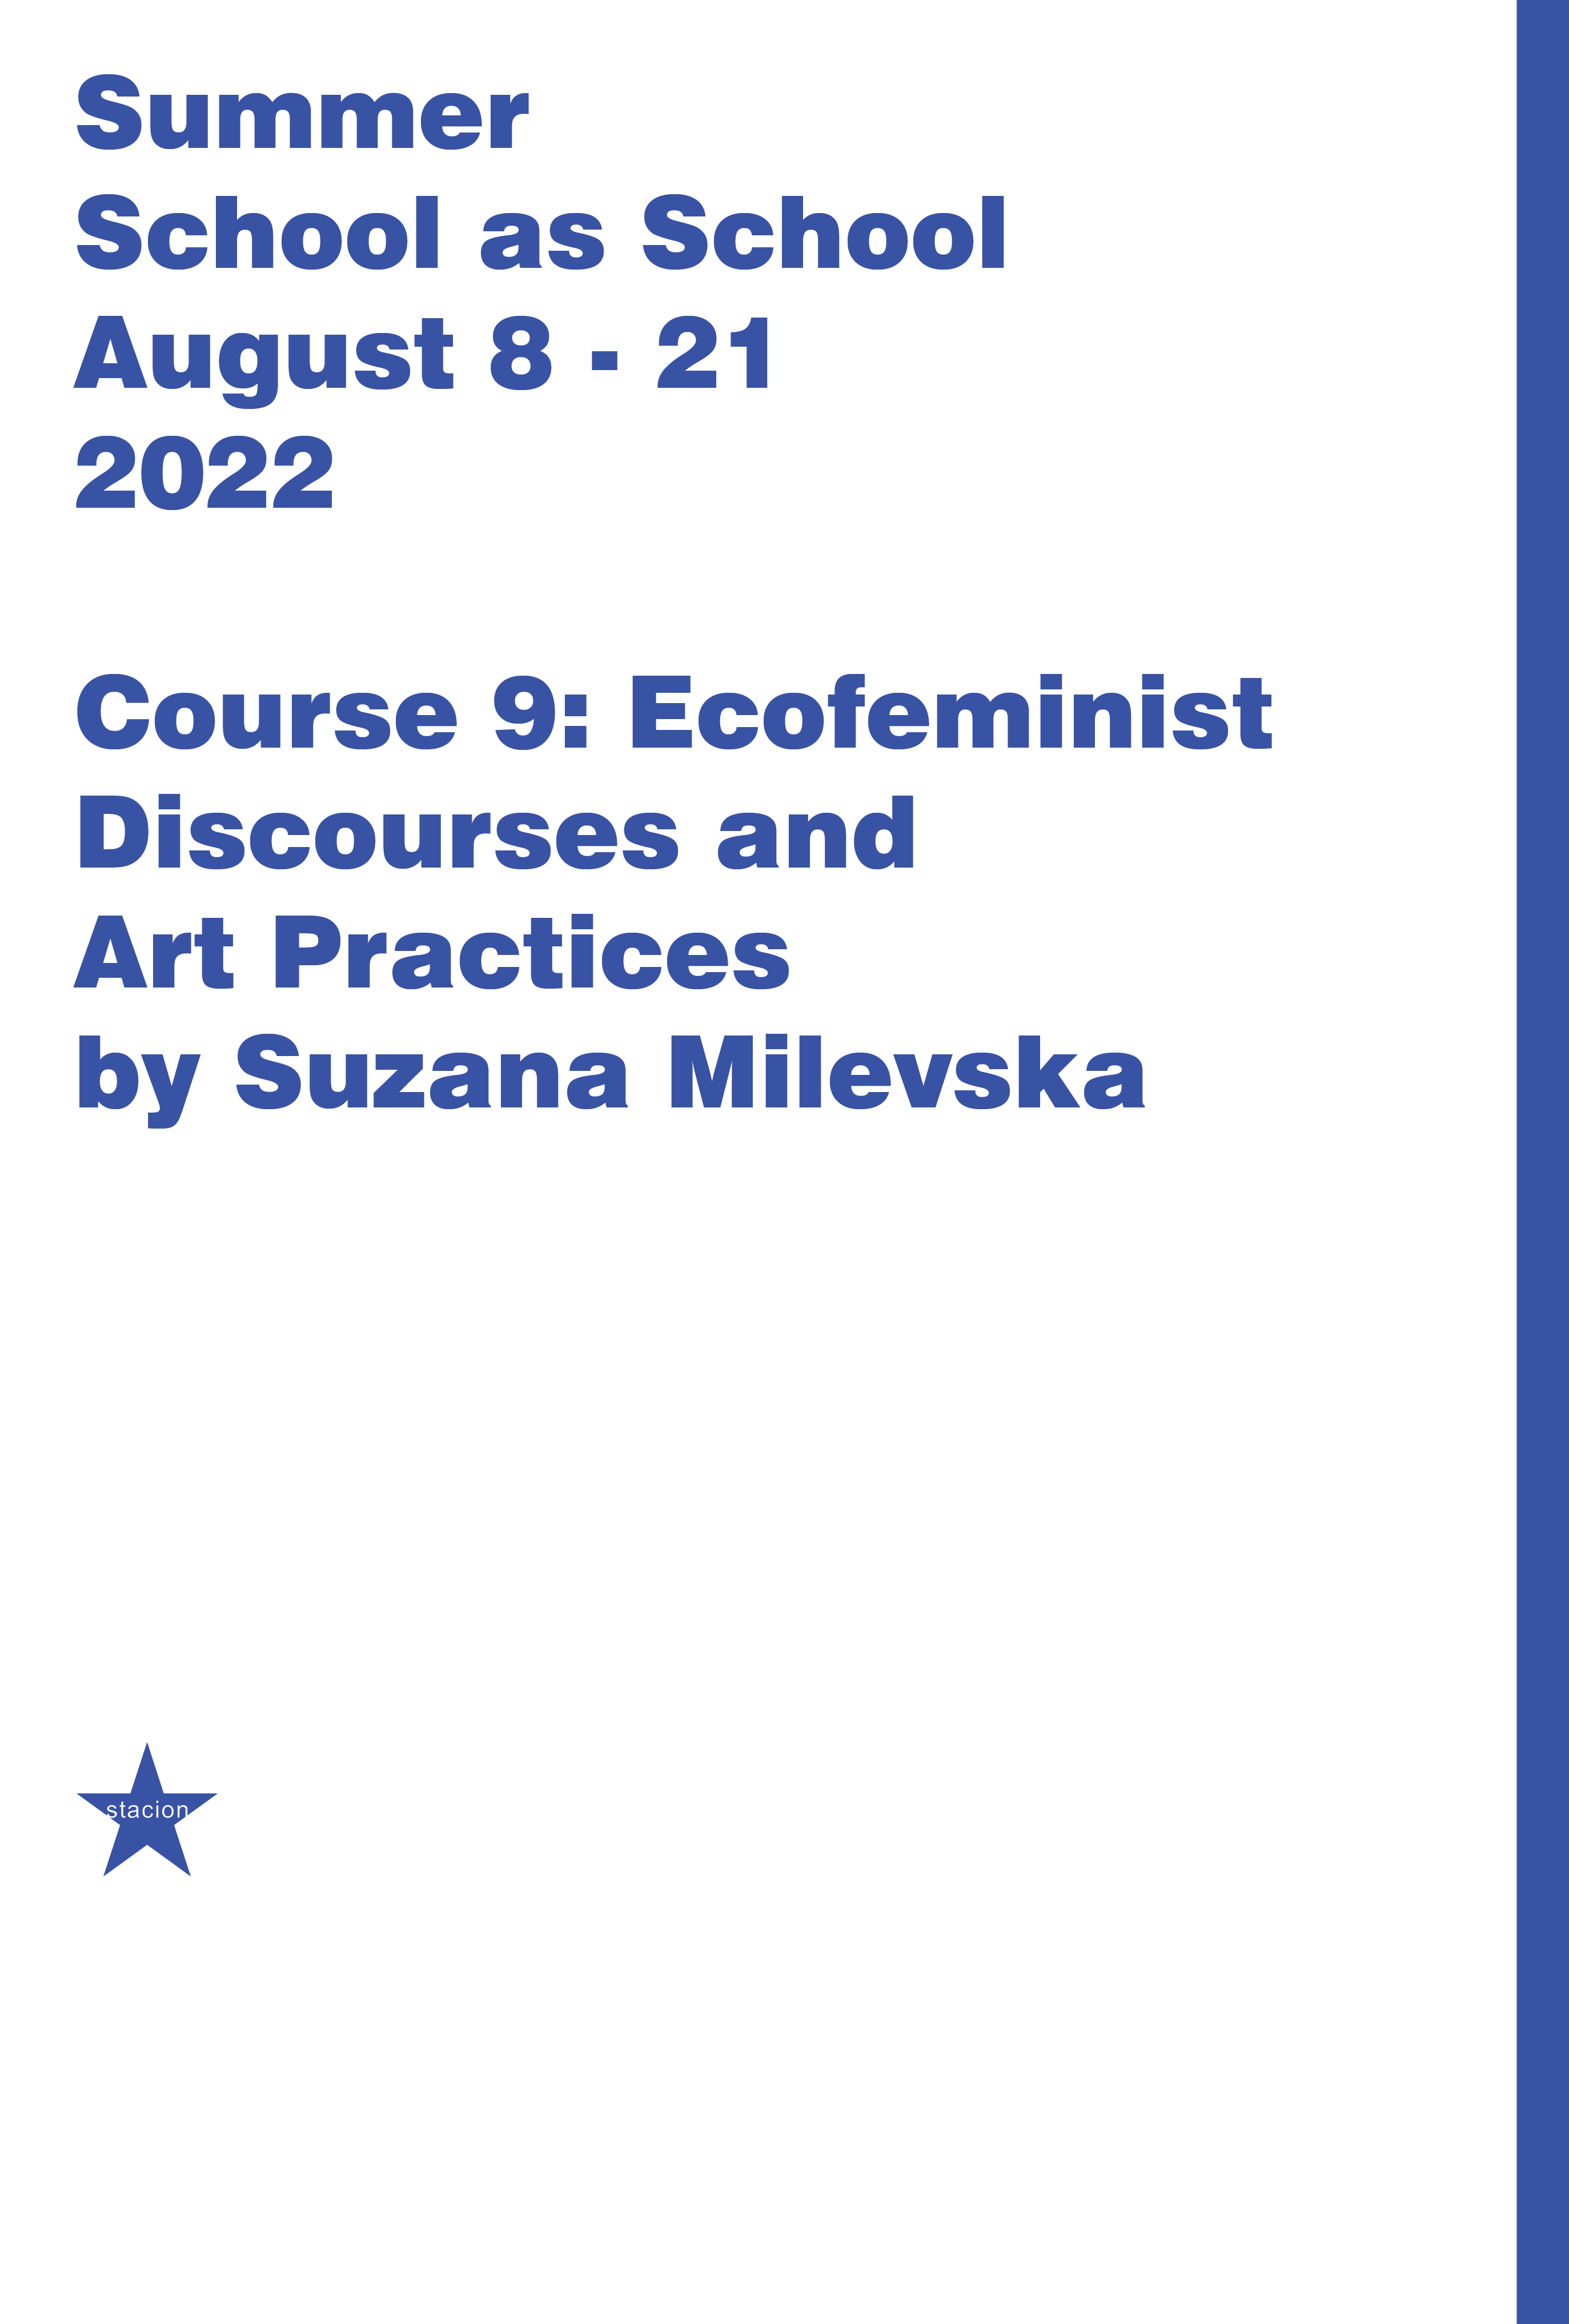 Course 9: Ecofeminist Discourses and Art Practices 